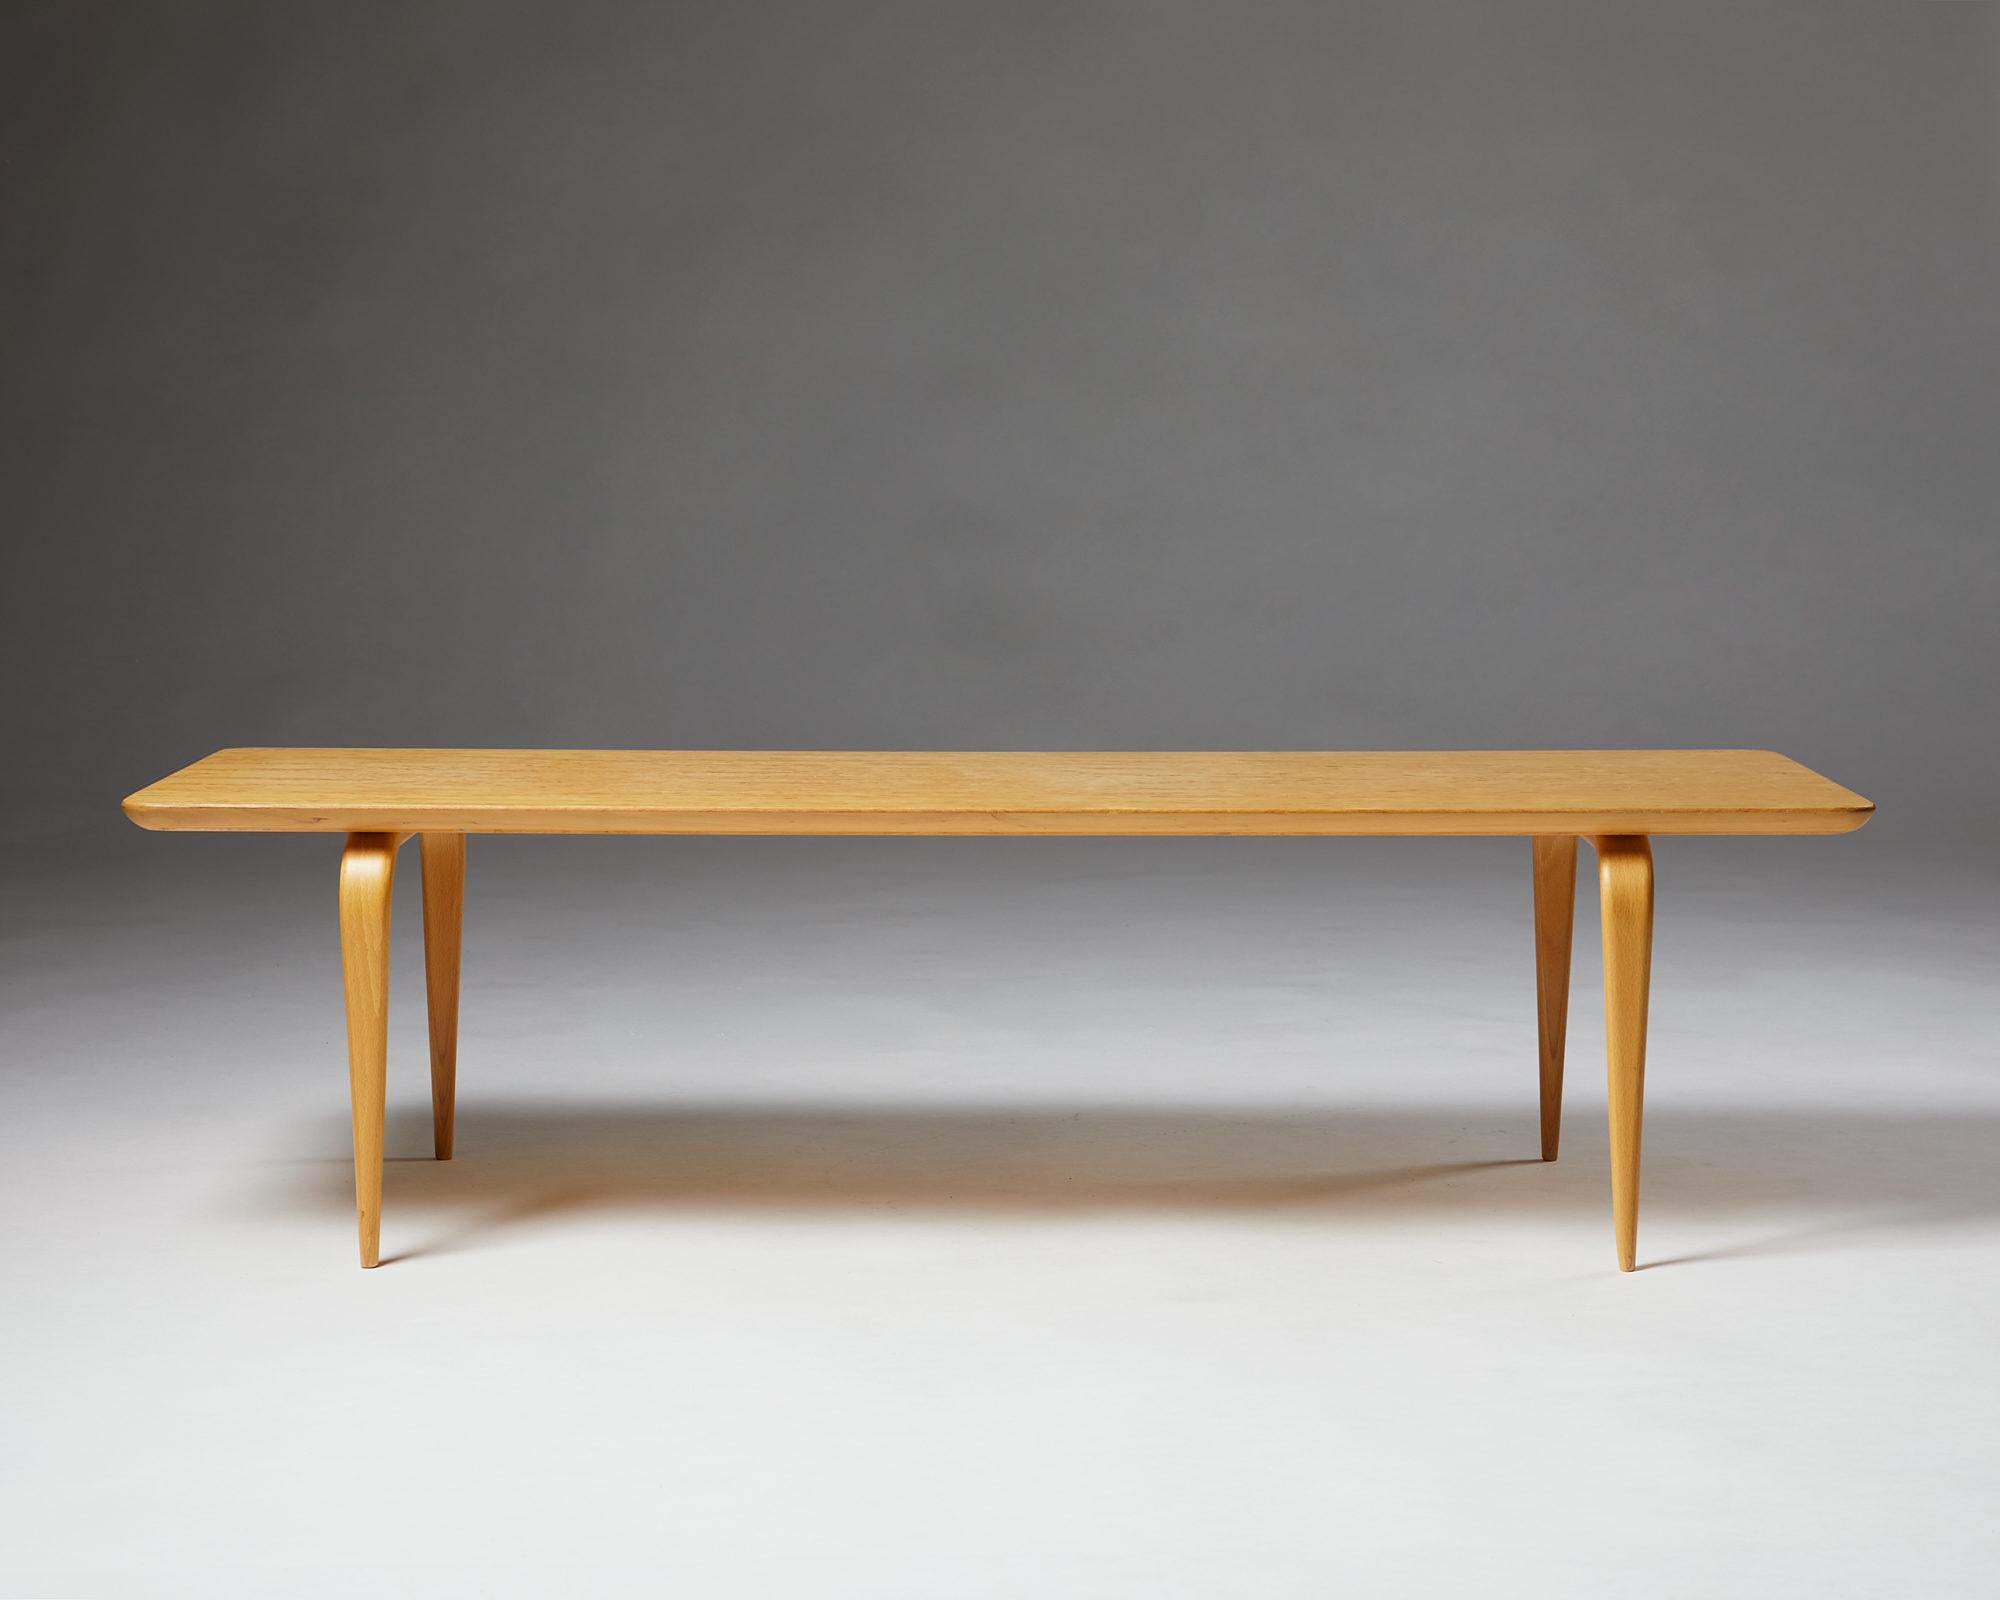 Mid-20th Century Bench/Coffee Table “Annika” Designed by Bruno Mathsson